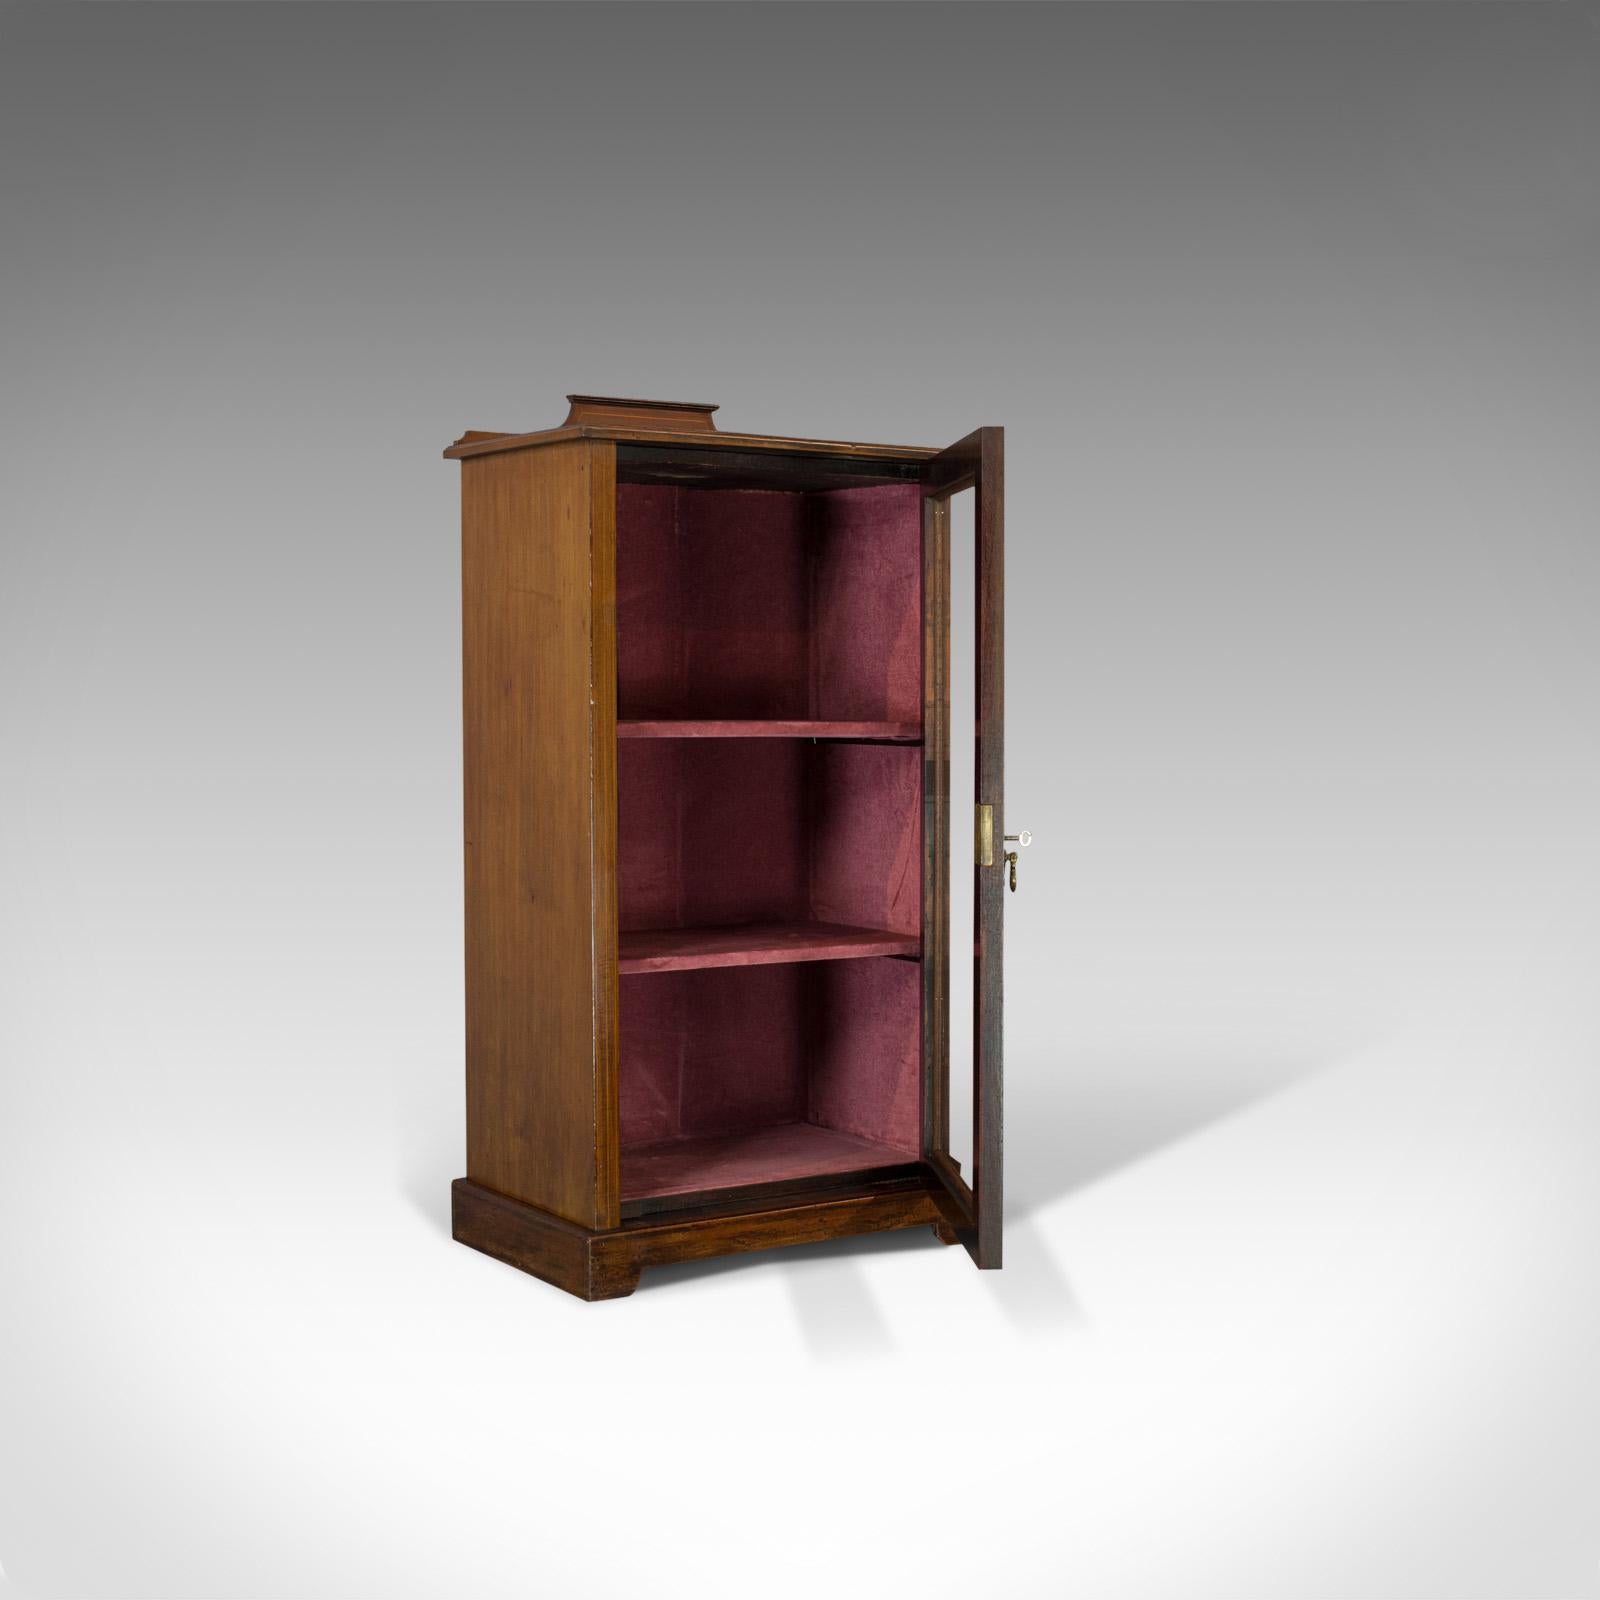 This is an antique pier cabinet. An English, mahogany display or show case and dating to the late 19th century, circa 1900.

Select mahogany displays a desirable aged patina
Consistent mellow hues throughout
Fine grain interest with a wax